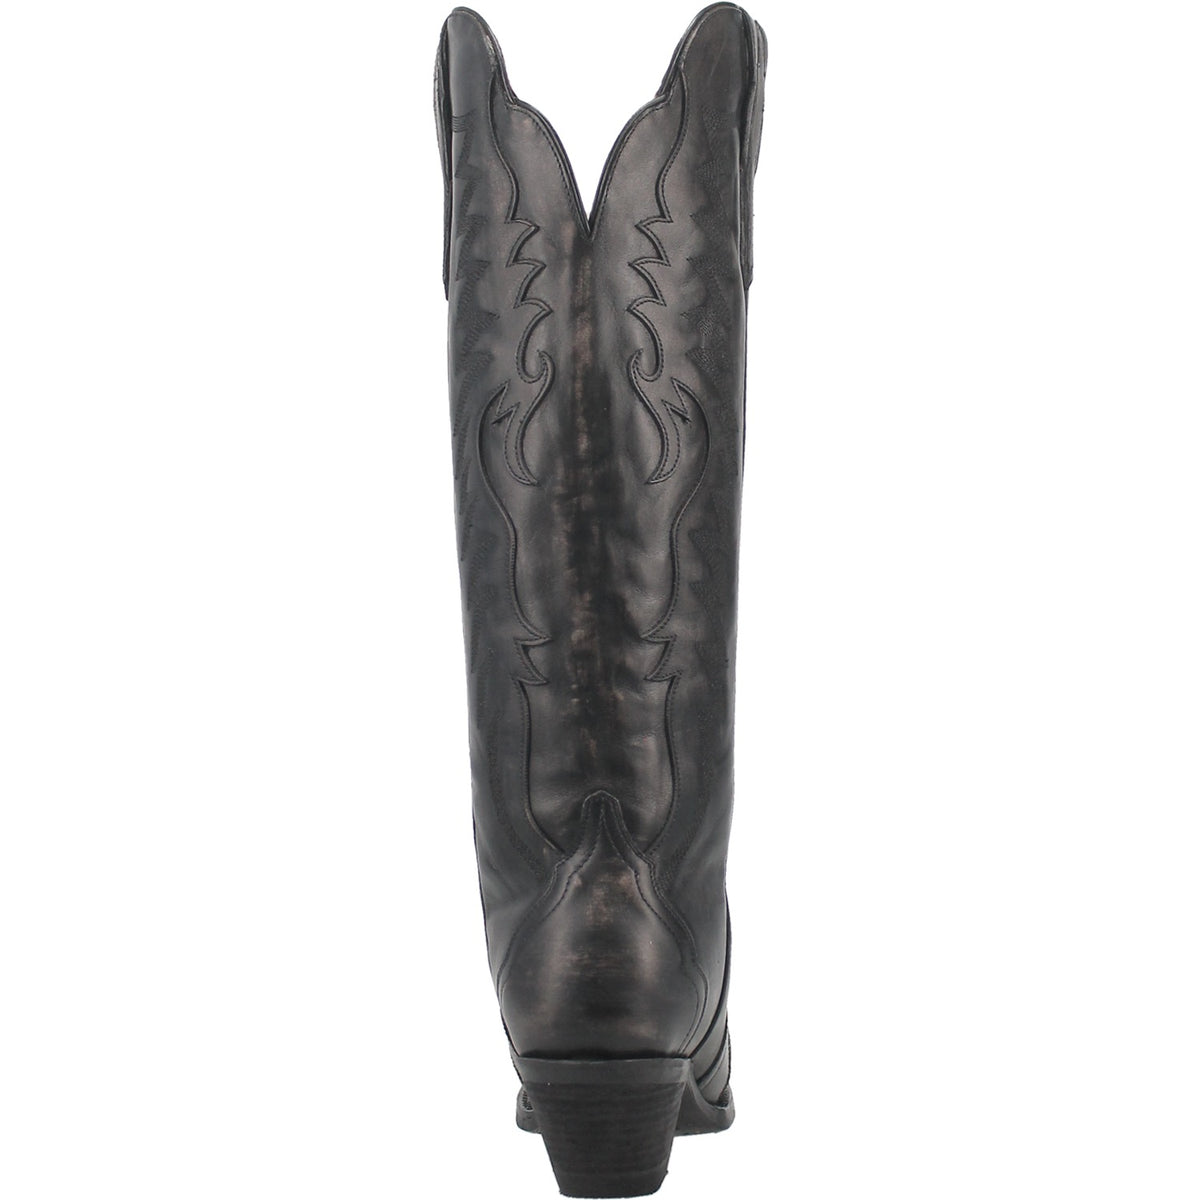 HALLIE LEATHER BOOT Cover